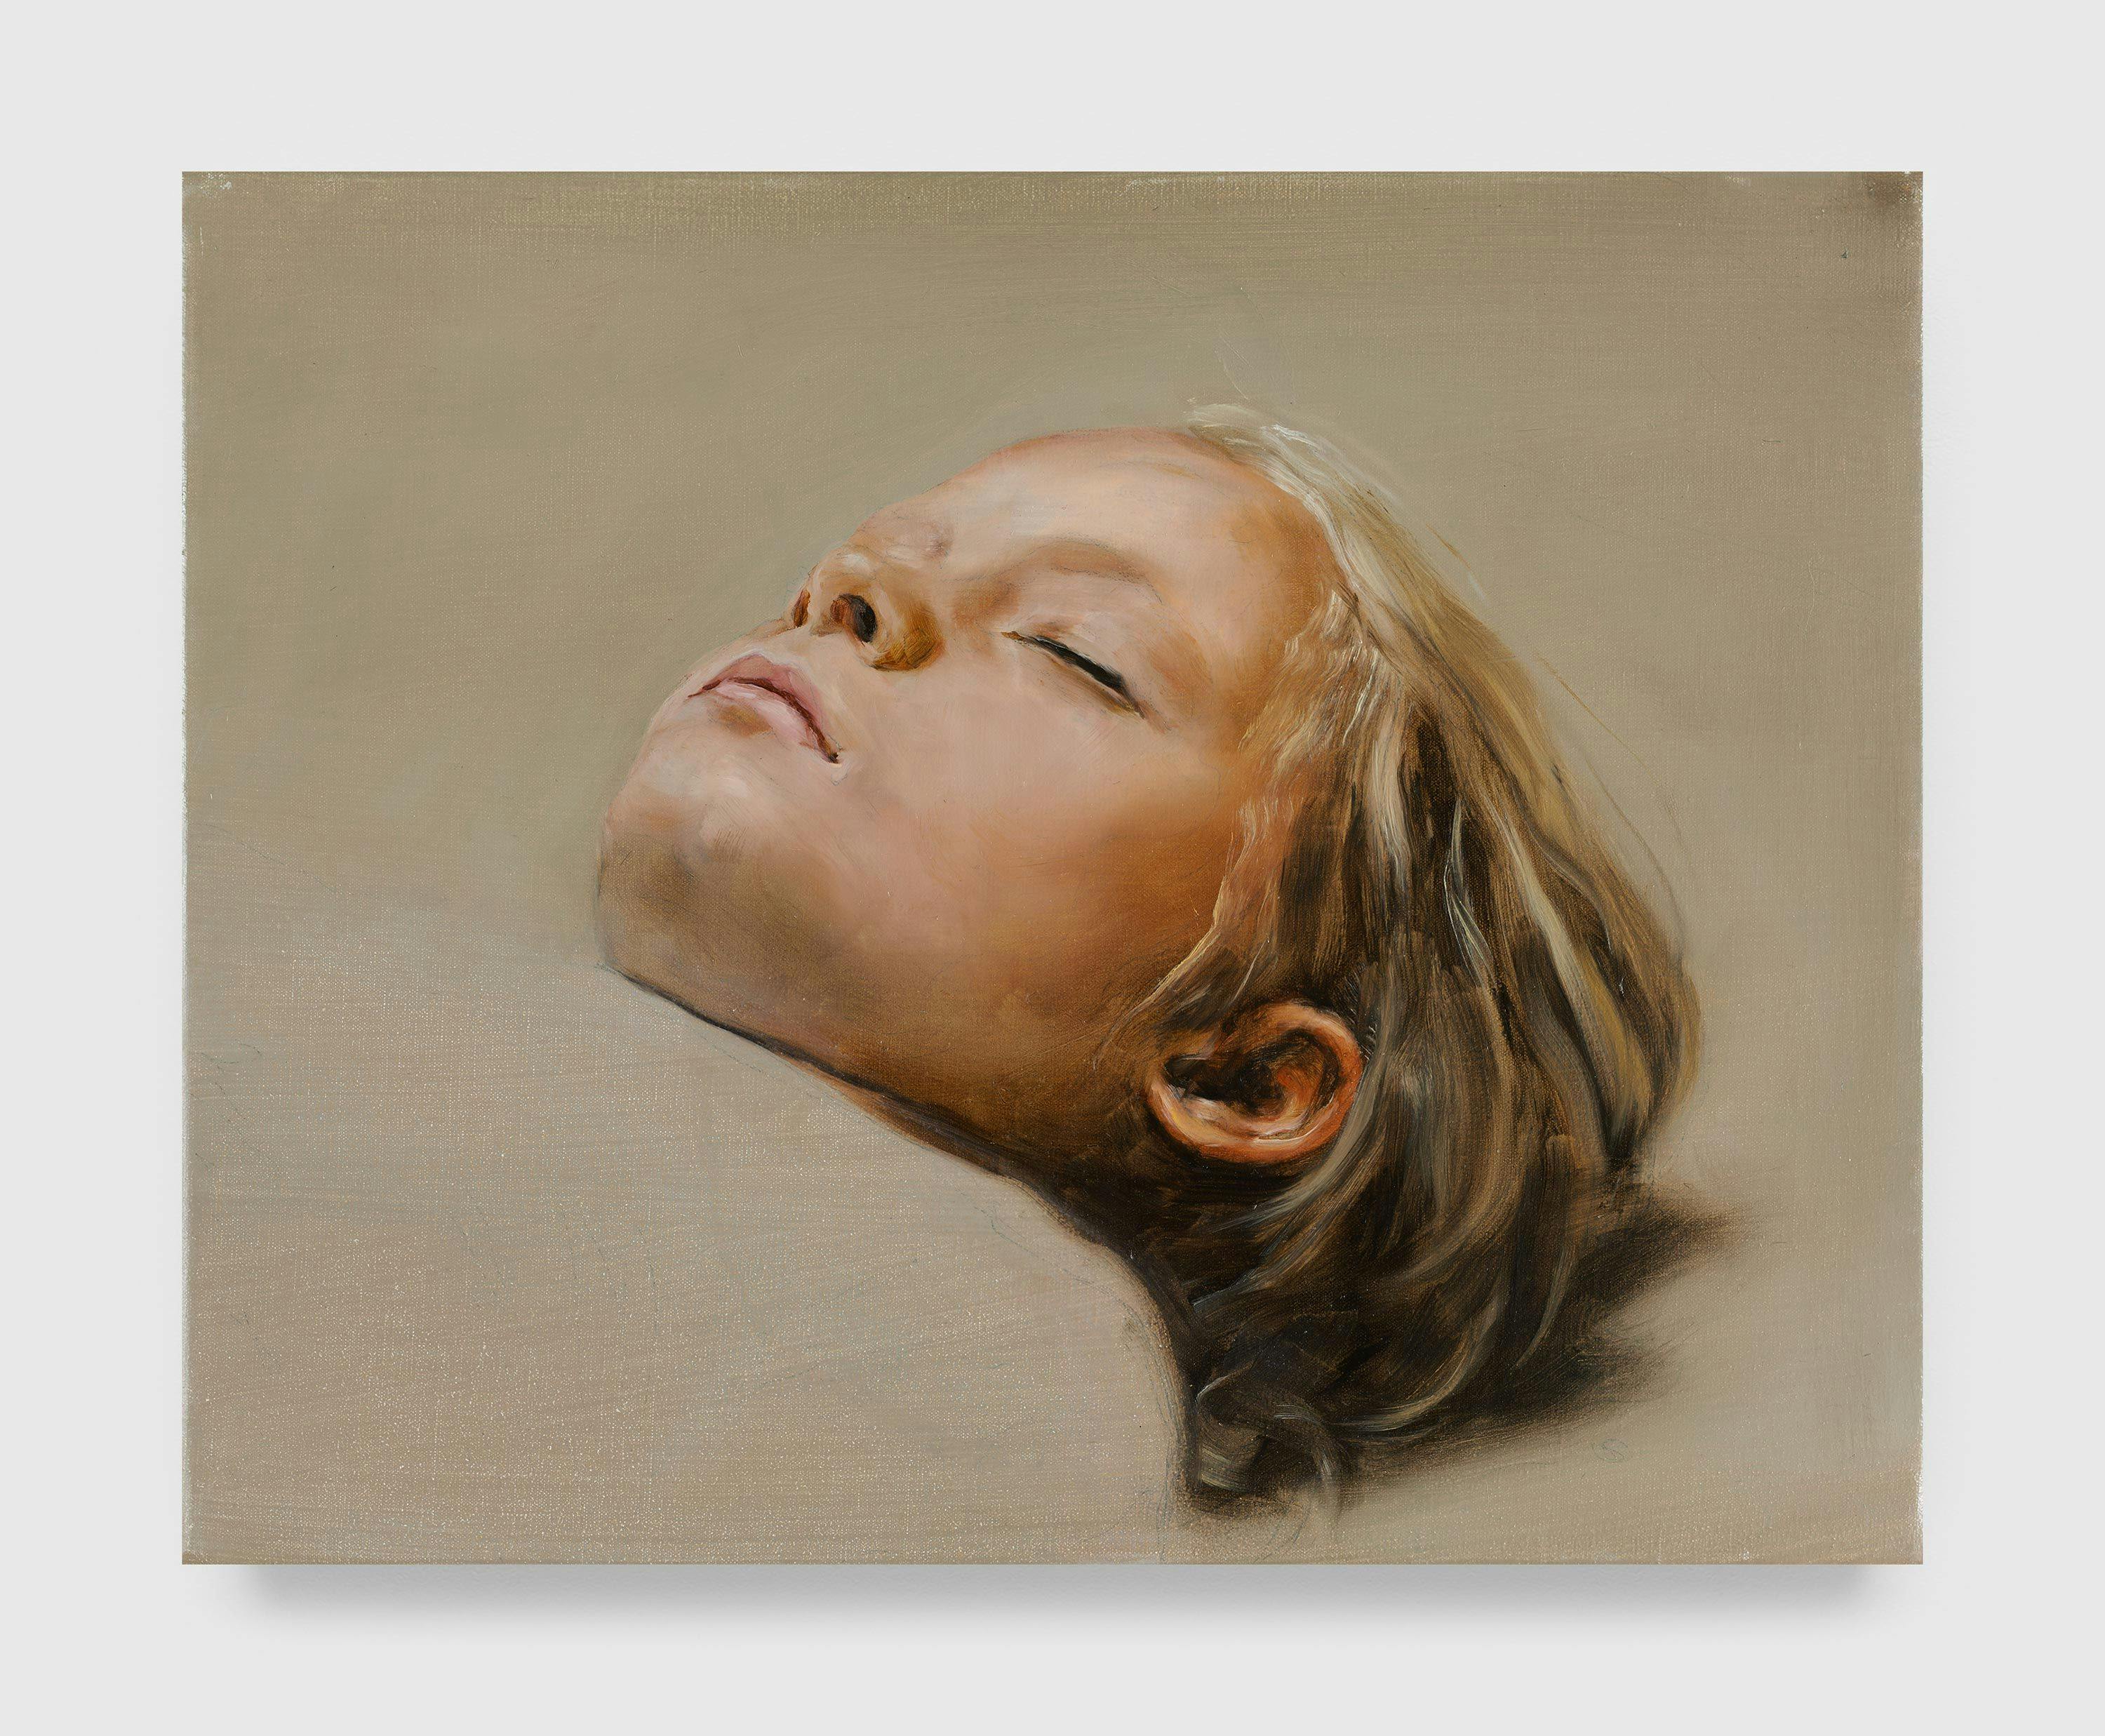 A painting by Michaël Borremans, titled Sleeper, dated 2008.